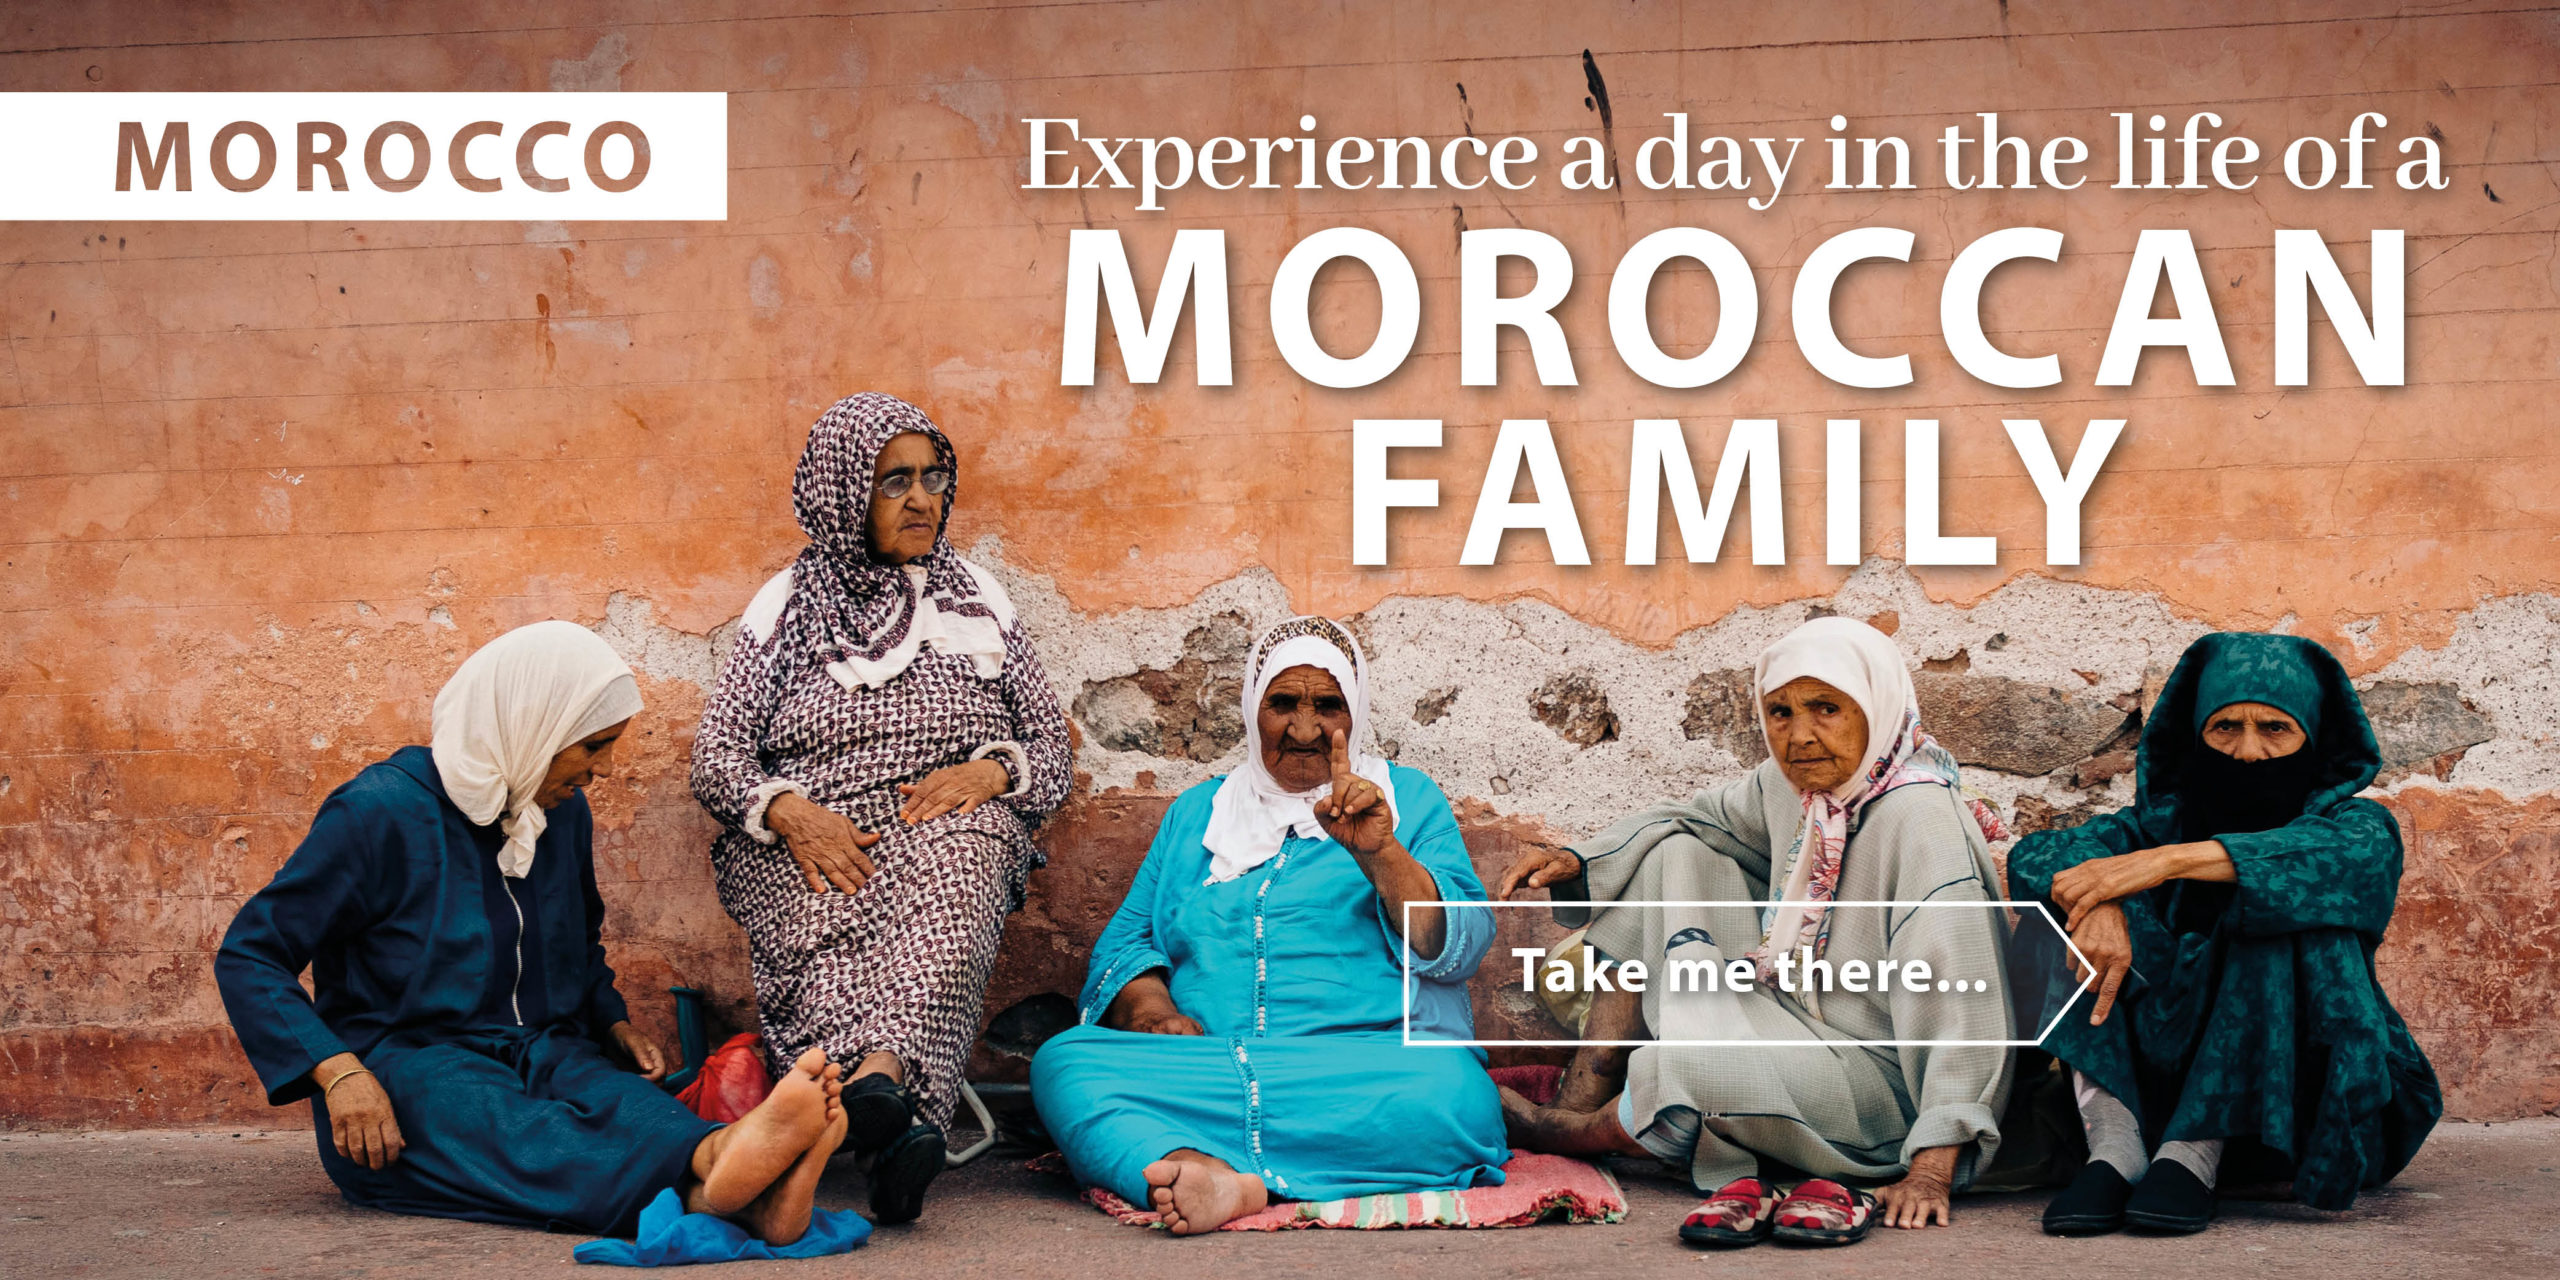 Authentic experience in Morocco